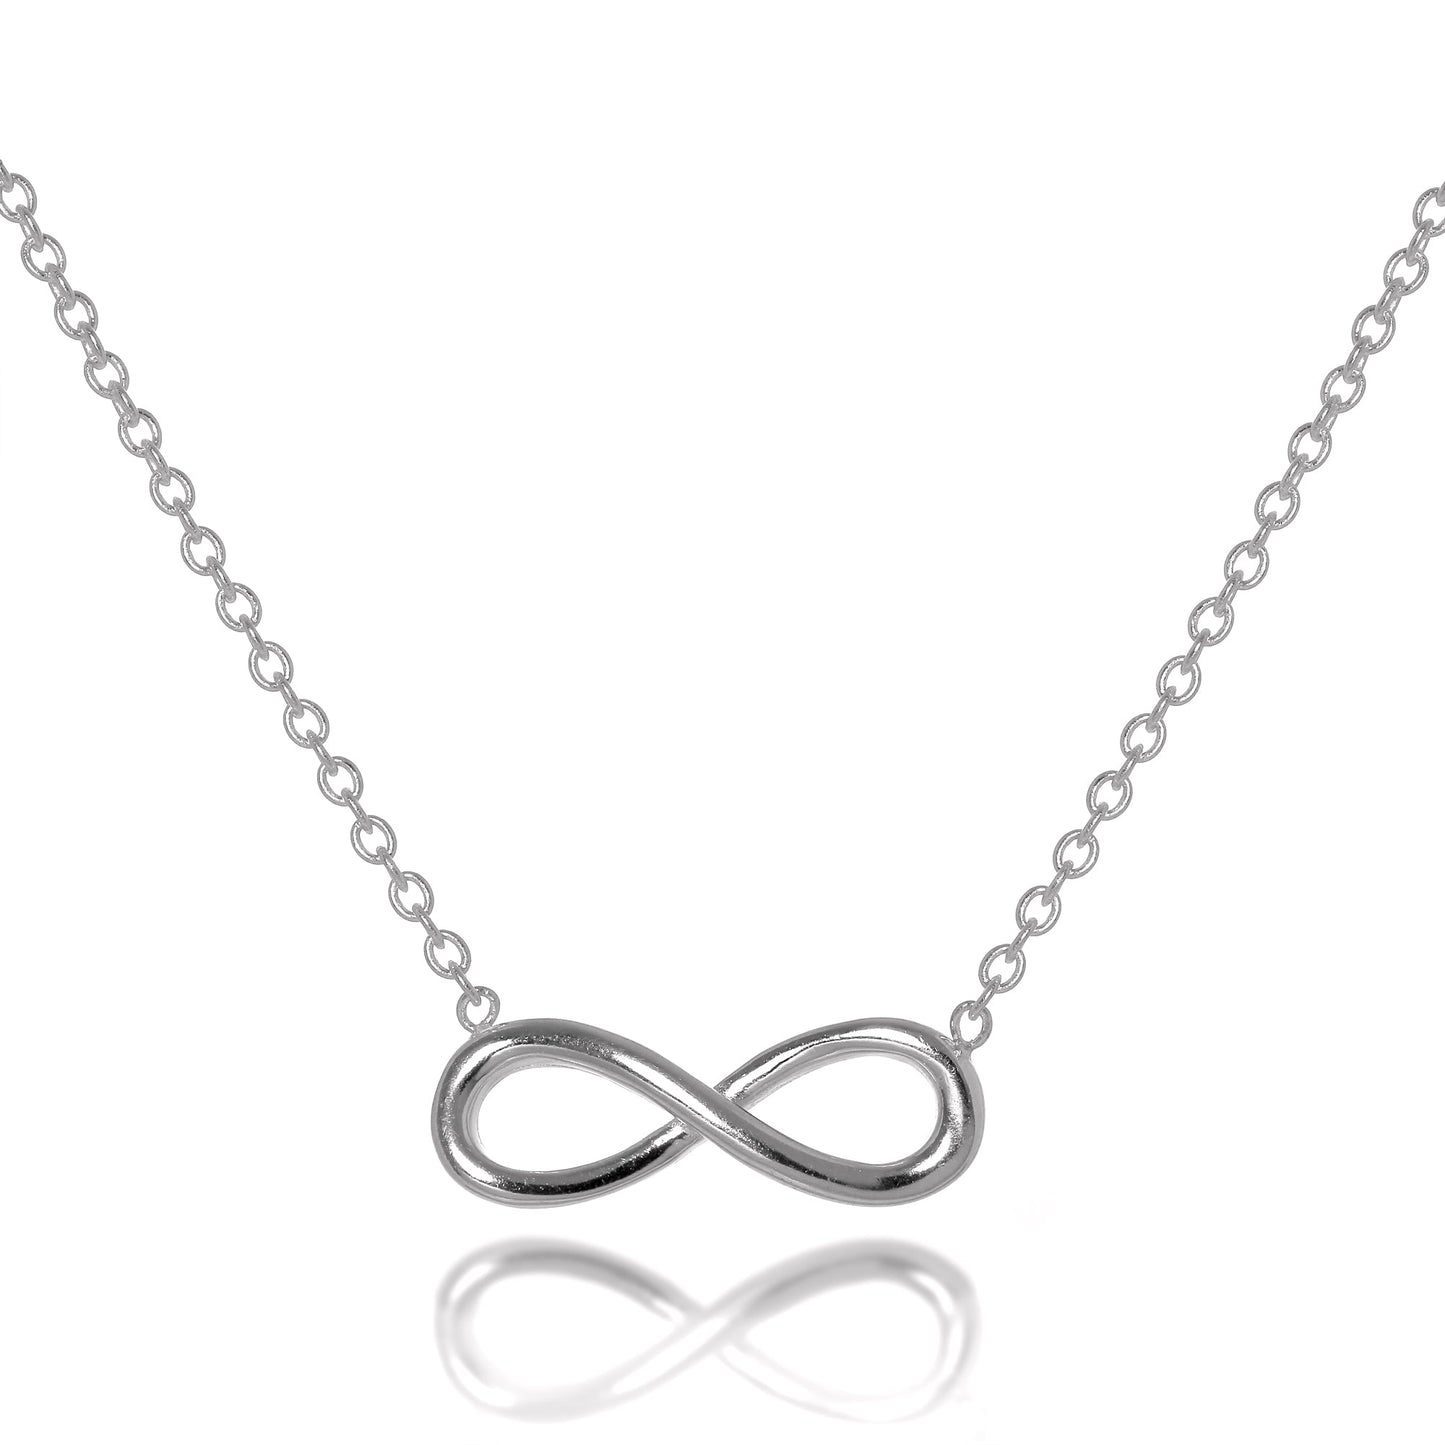 Sterling Silver Infinity Necklace 16-18 Inch Chain